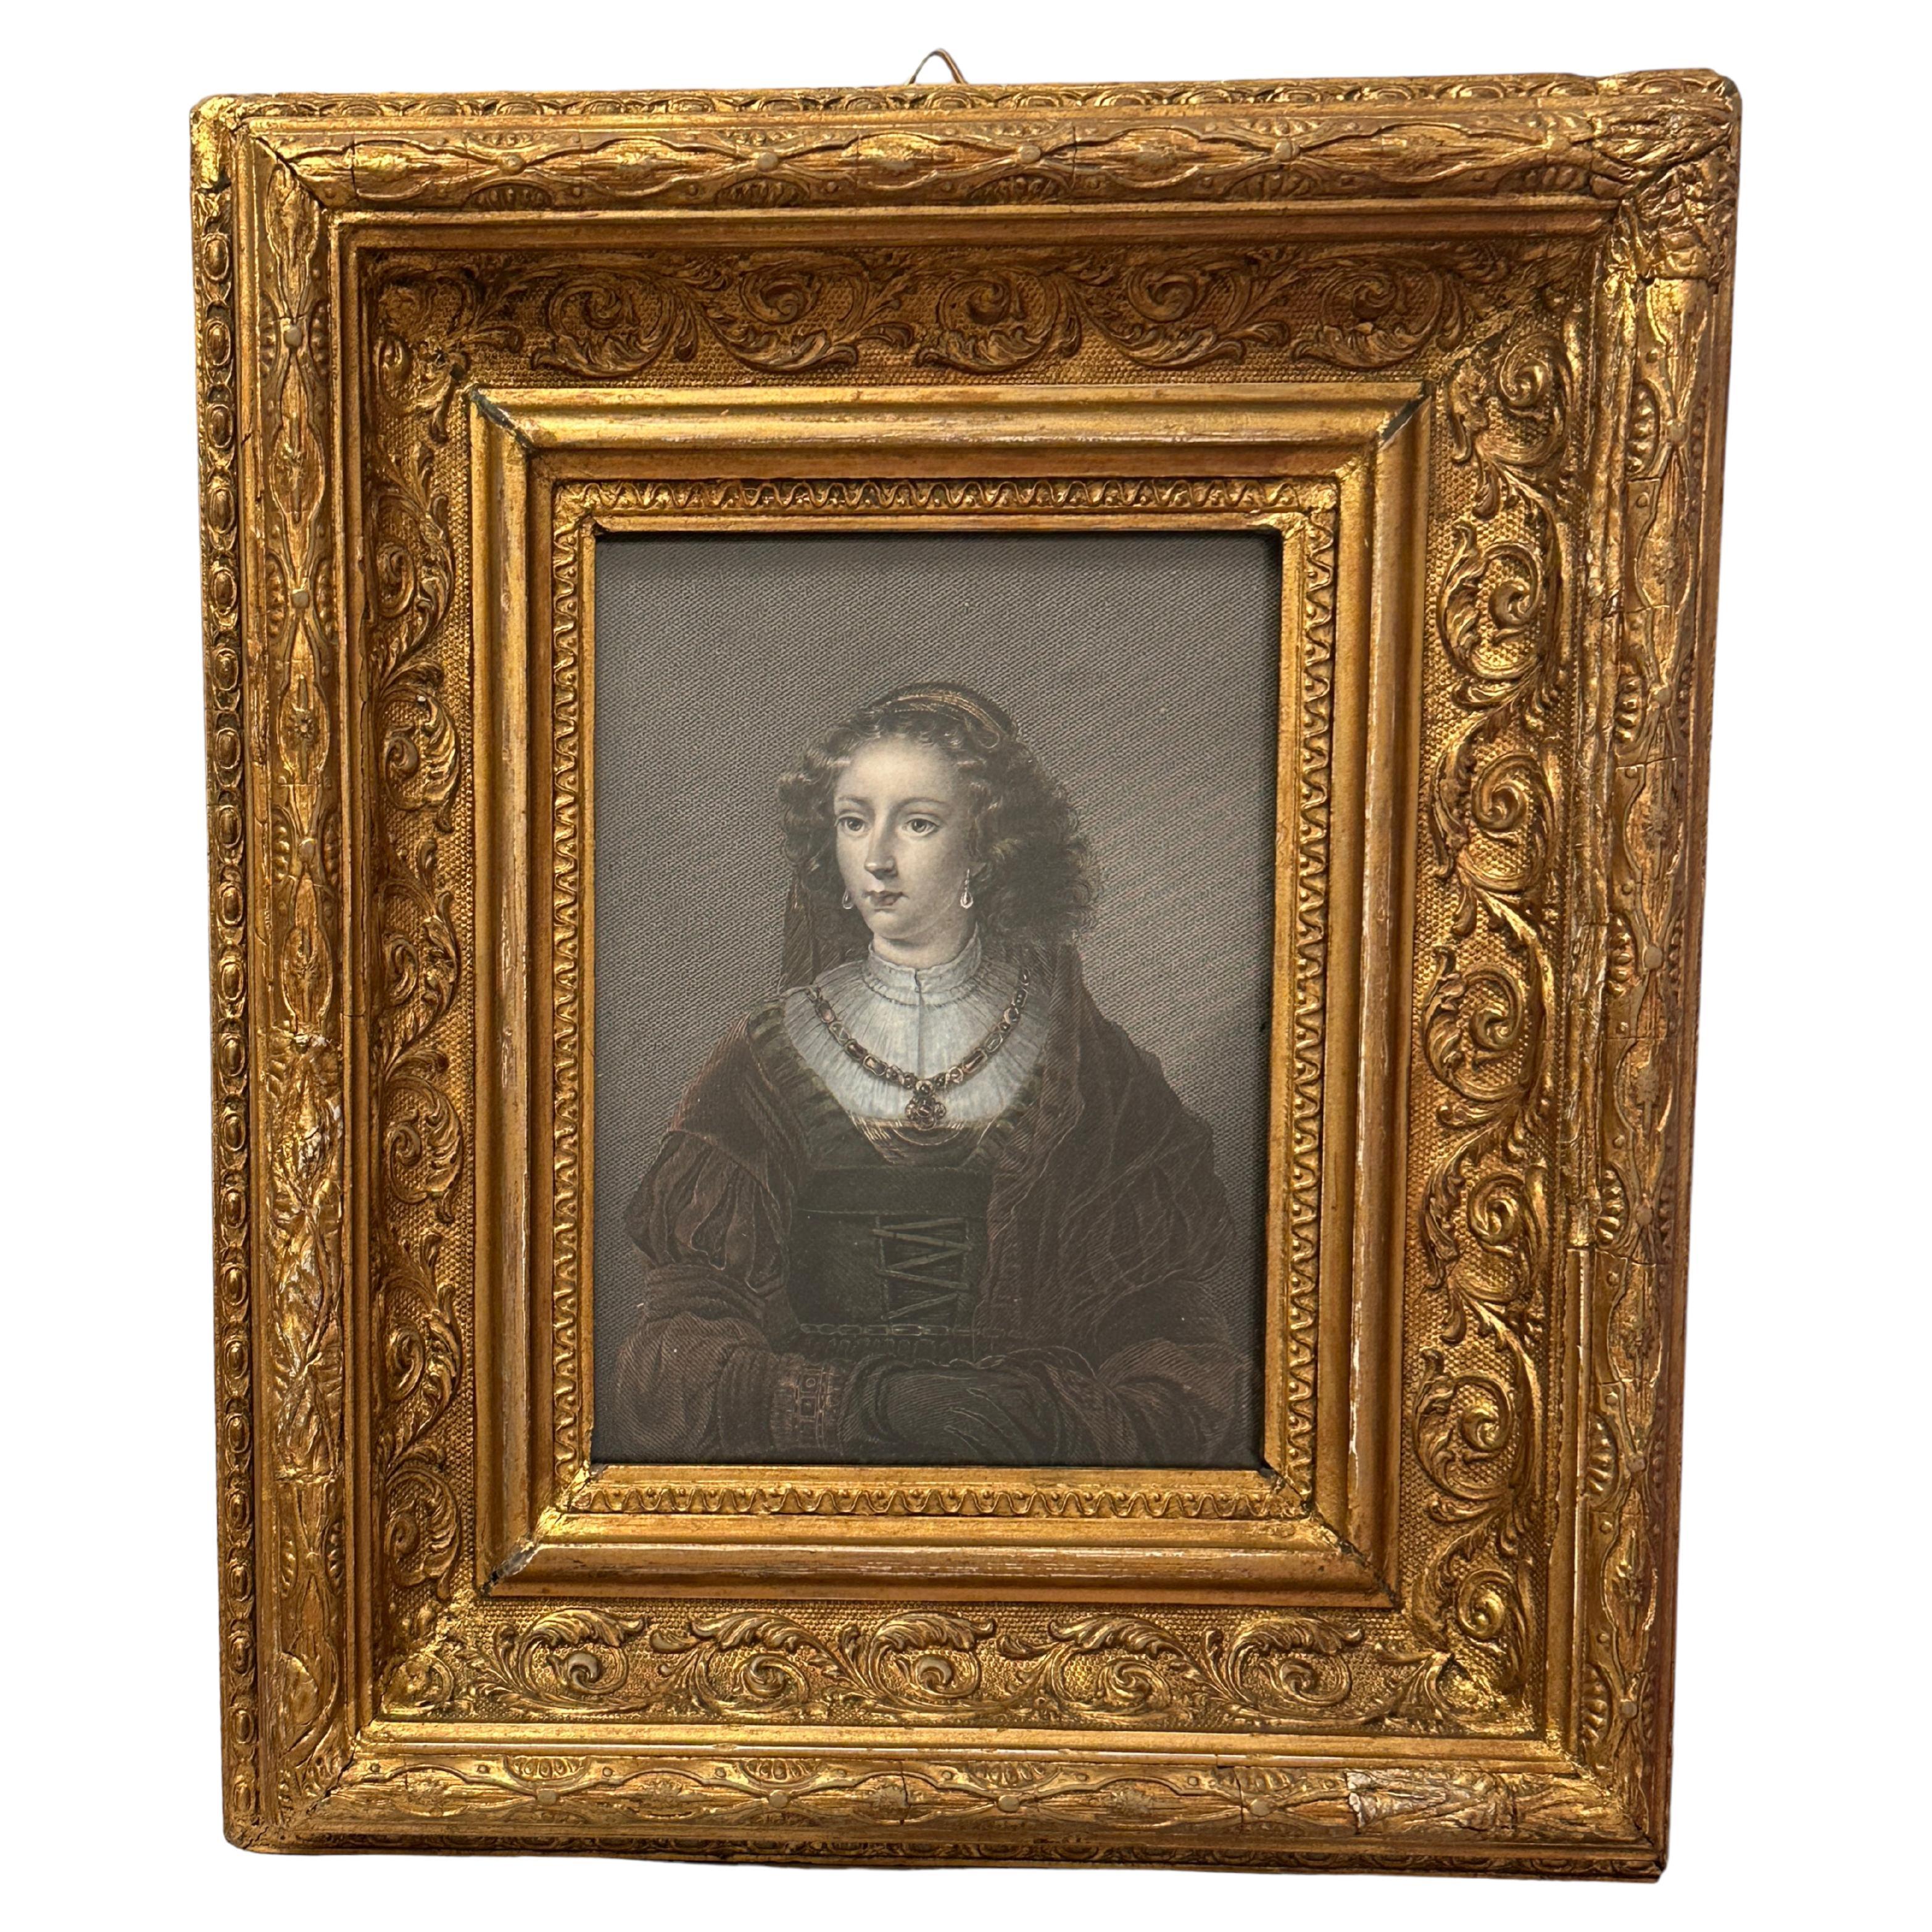 Framed German Hand Colored Stealing Engraving Portrait of a Noble Lady, 1840s For Sale